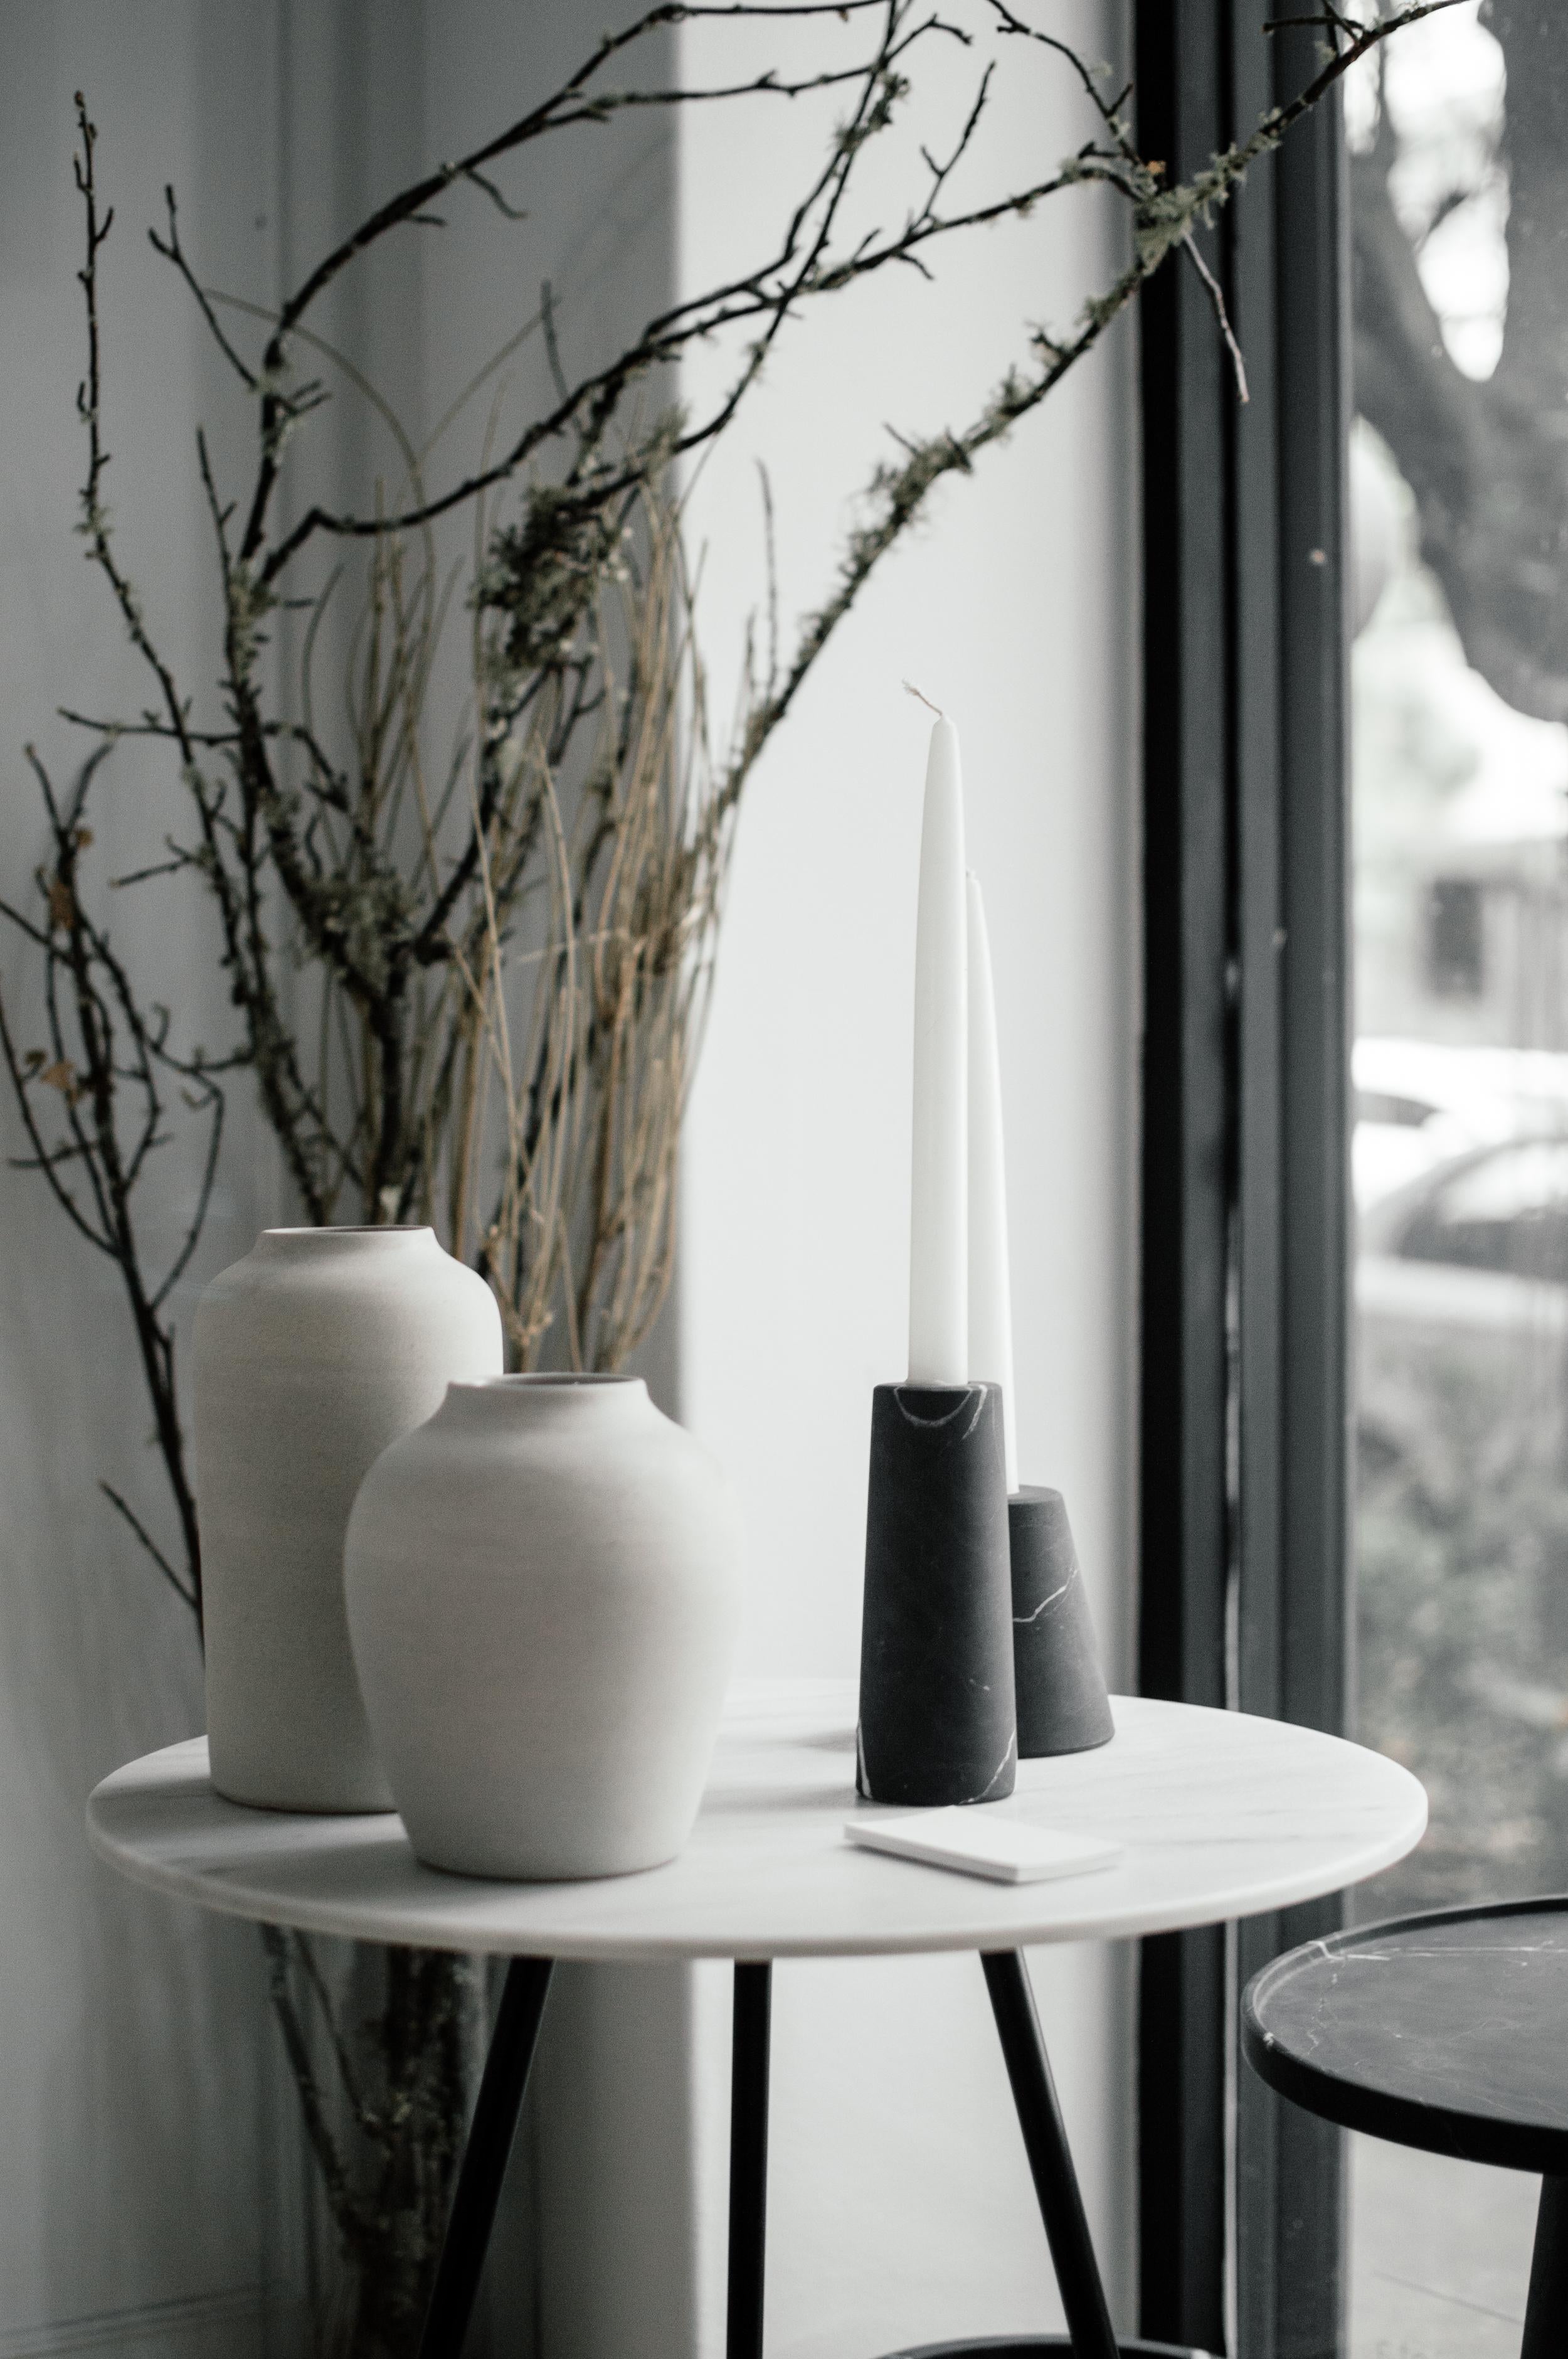 Two candleholders in Monterrey black marble. Handmade in MÃ©xico by local craftsmen.   Dimensions:  Small: 10 D x 10 W x 10 H cm Large: 6 D x 6 W x 15 H cm.  Production time: 6-8 weeks for items without marble / 13-14 weeks for marble pieces.